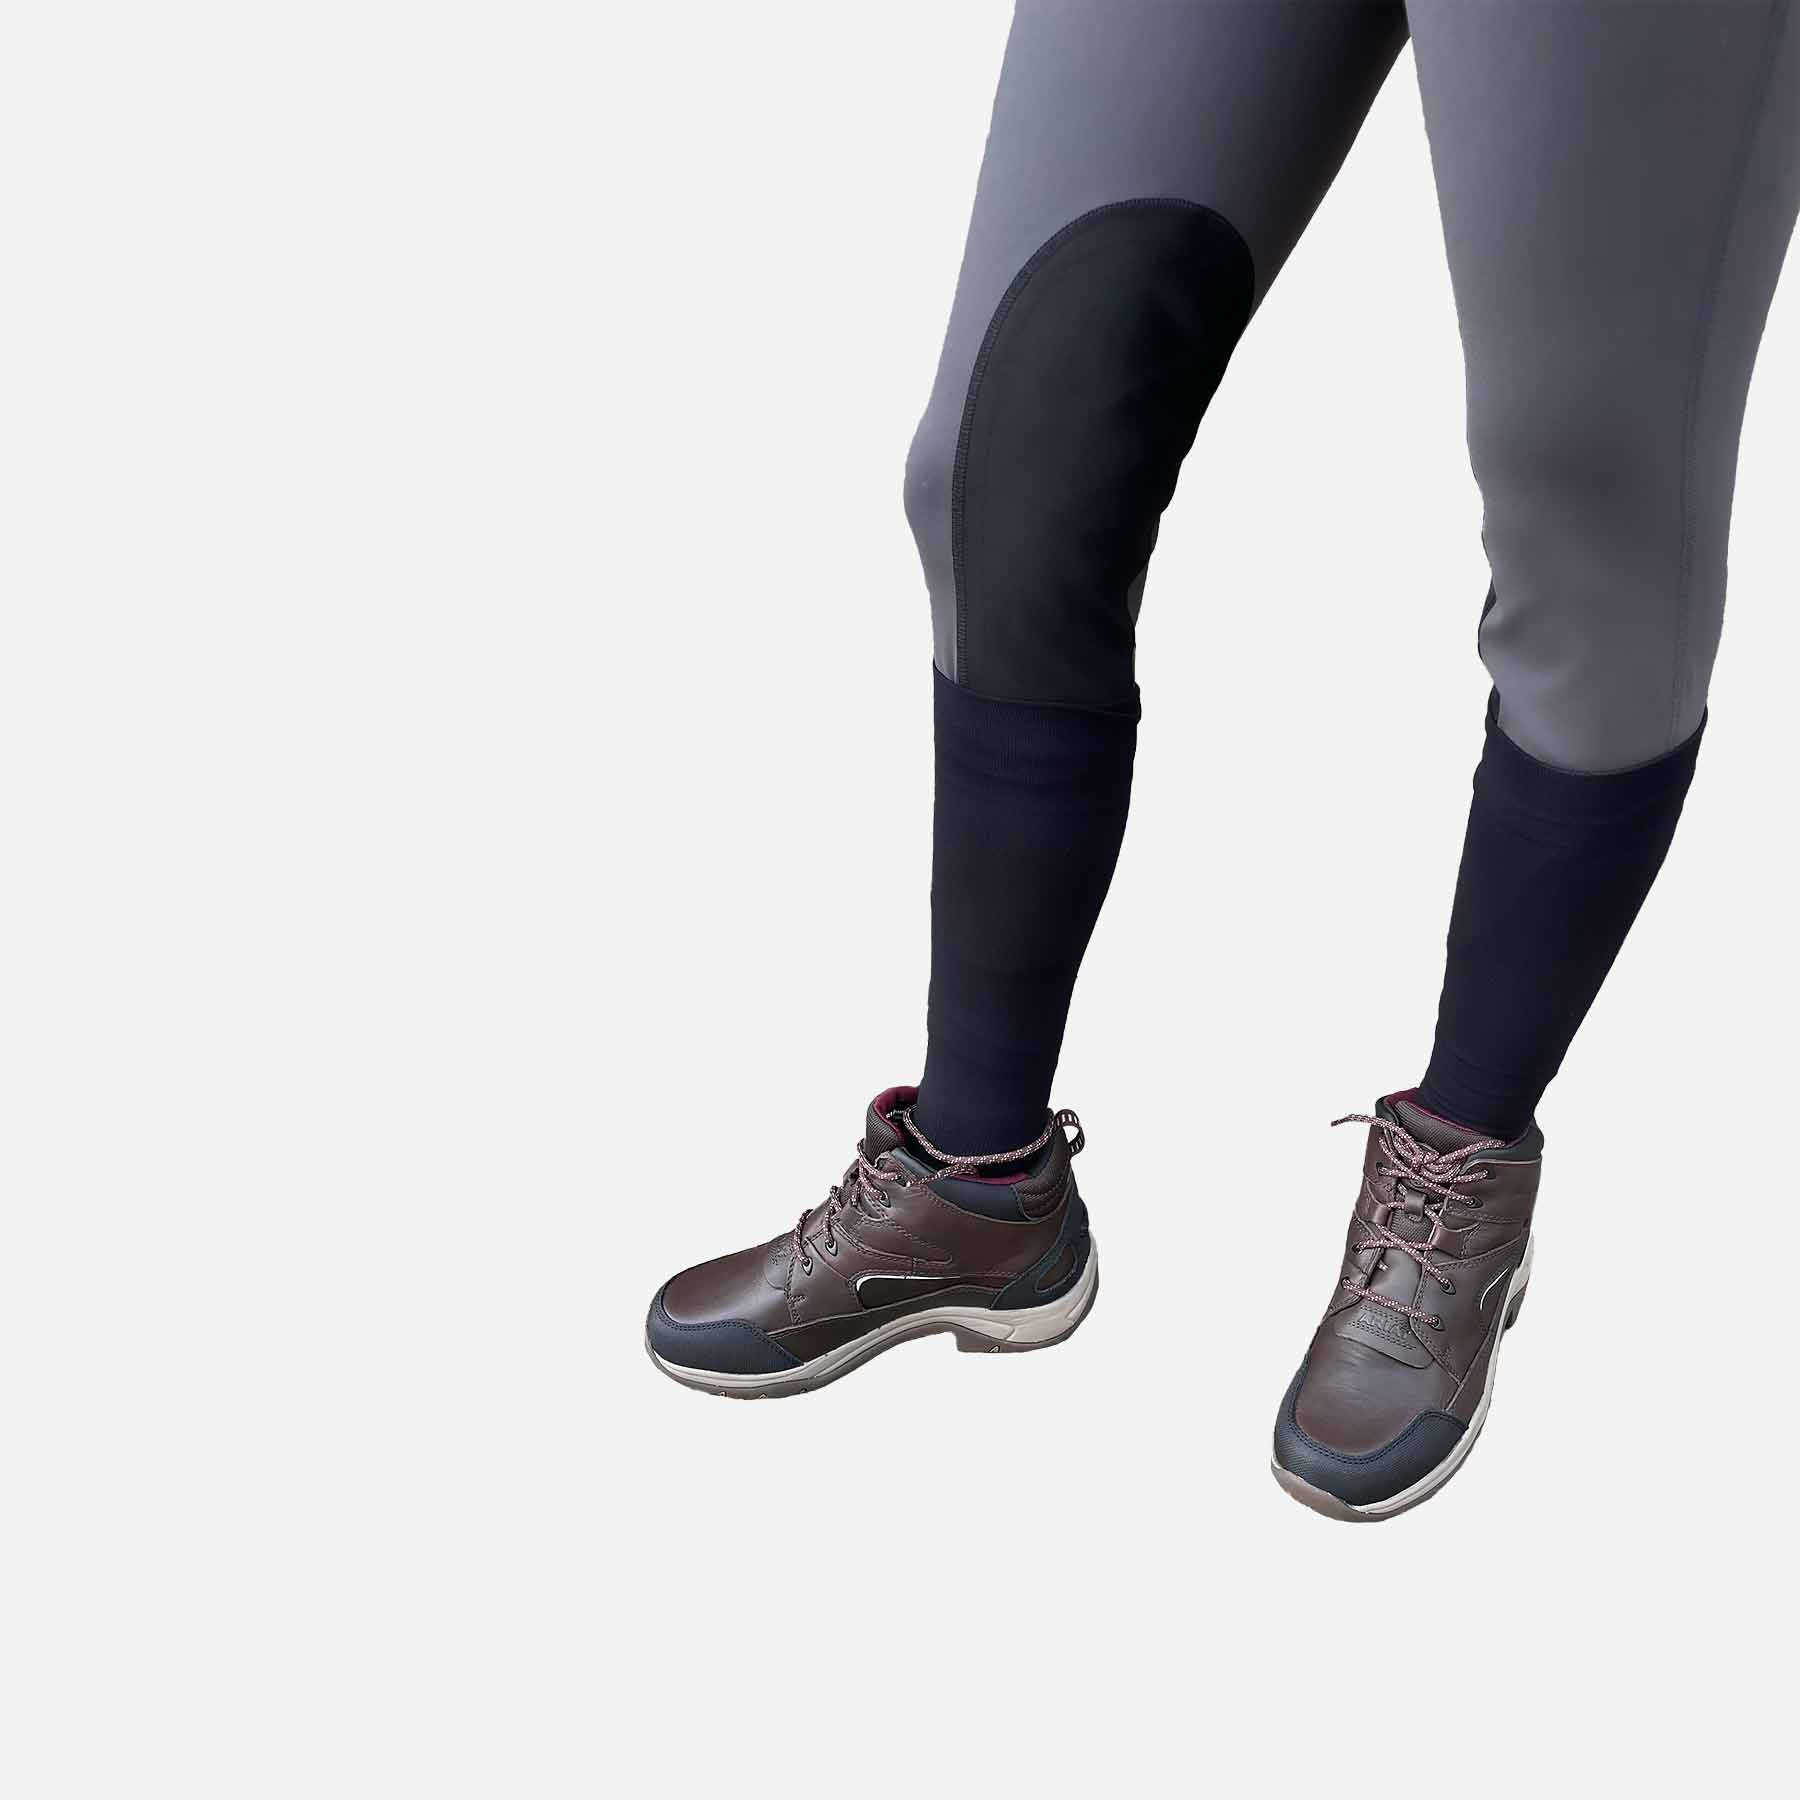 Freerein Equipment | Super Fit Tights | Charcoal